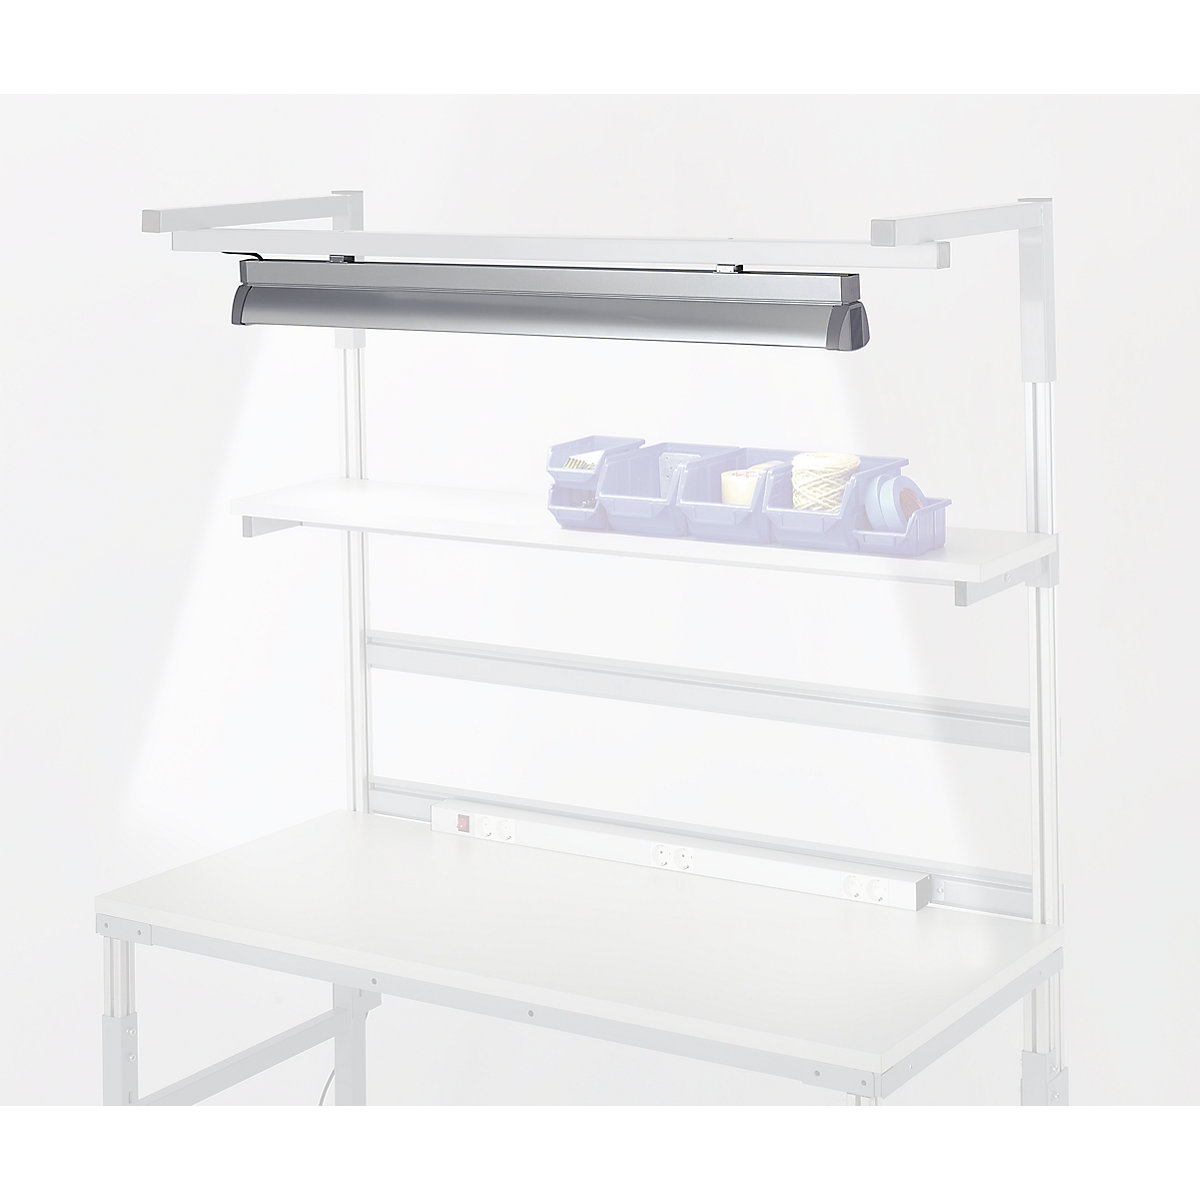 Workstation lamp – RAU, 2 x 54 W fluorescent tubes, length 1200 mm, for table width 1500 mm-4